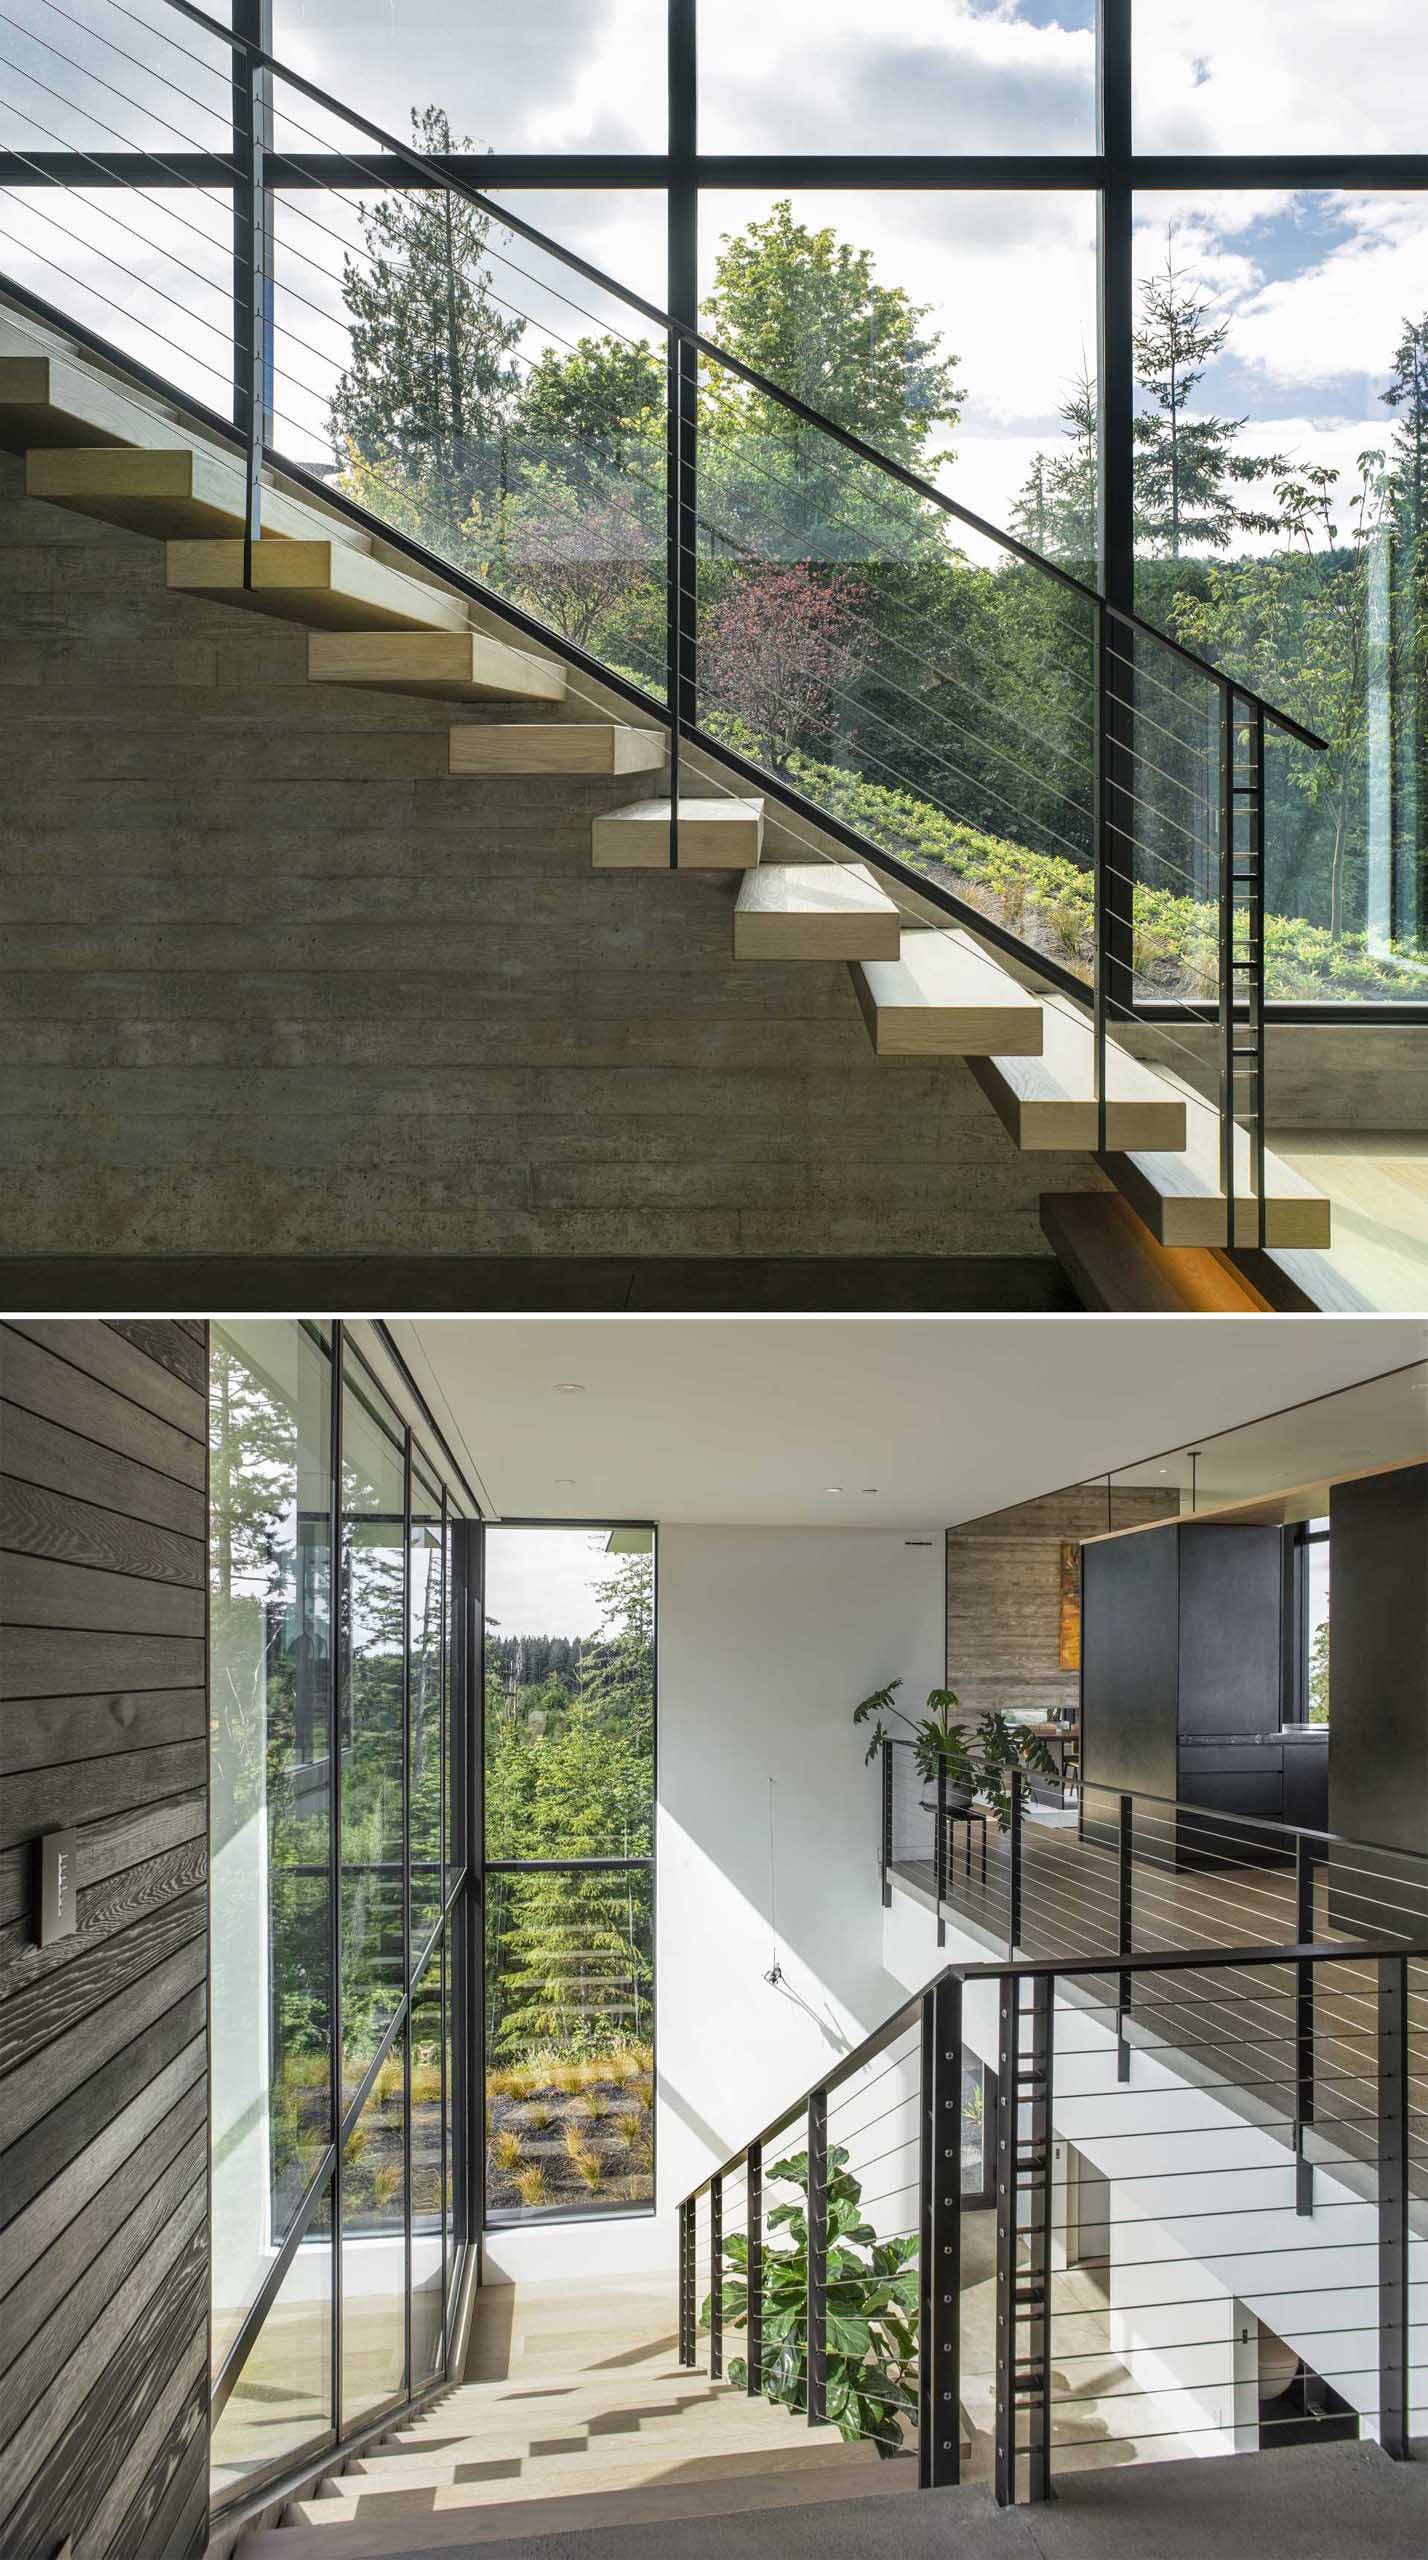 Stairs alongside a wall of windows connect the social areas with the other areas of the home.